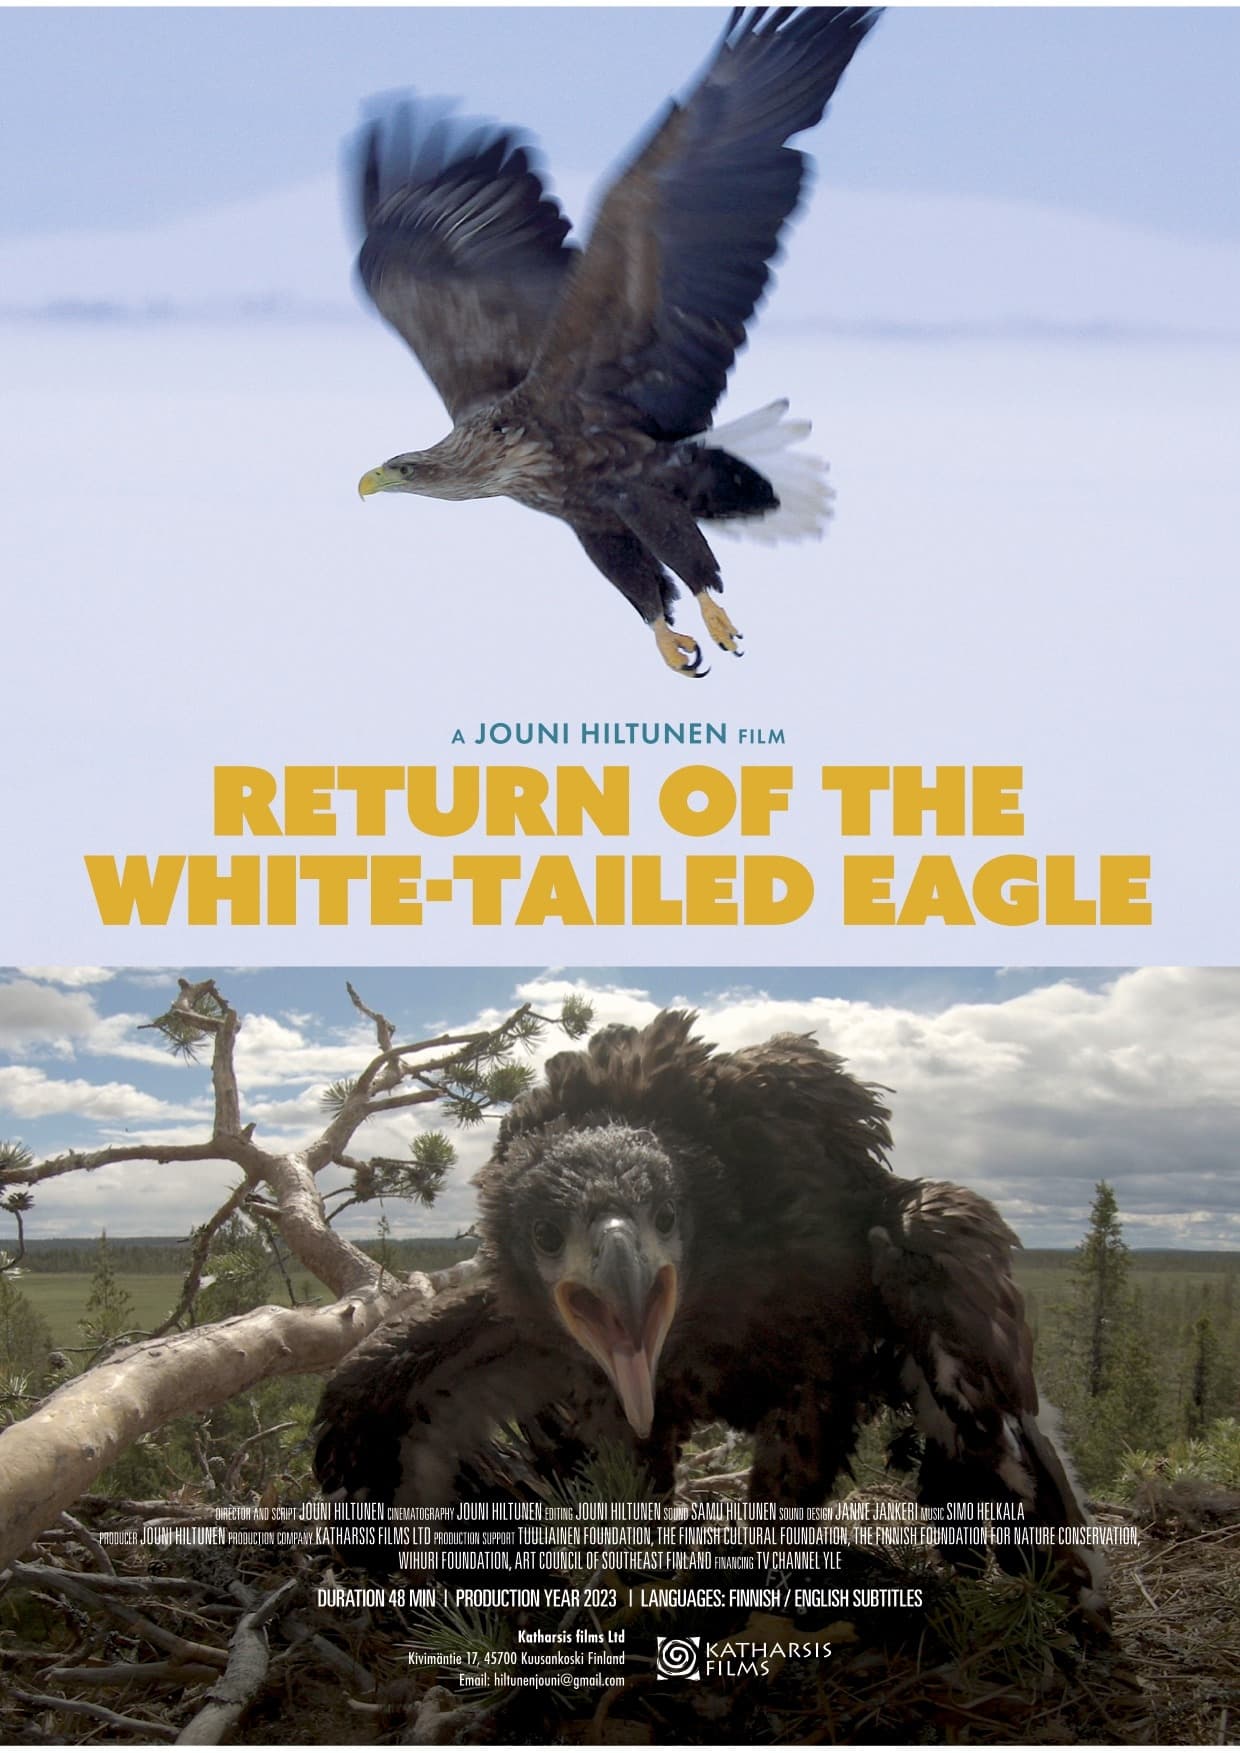 Return of the White-tailed Eagle